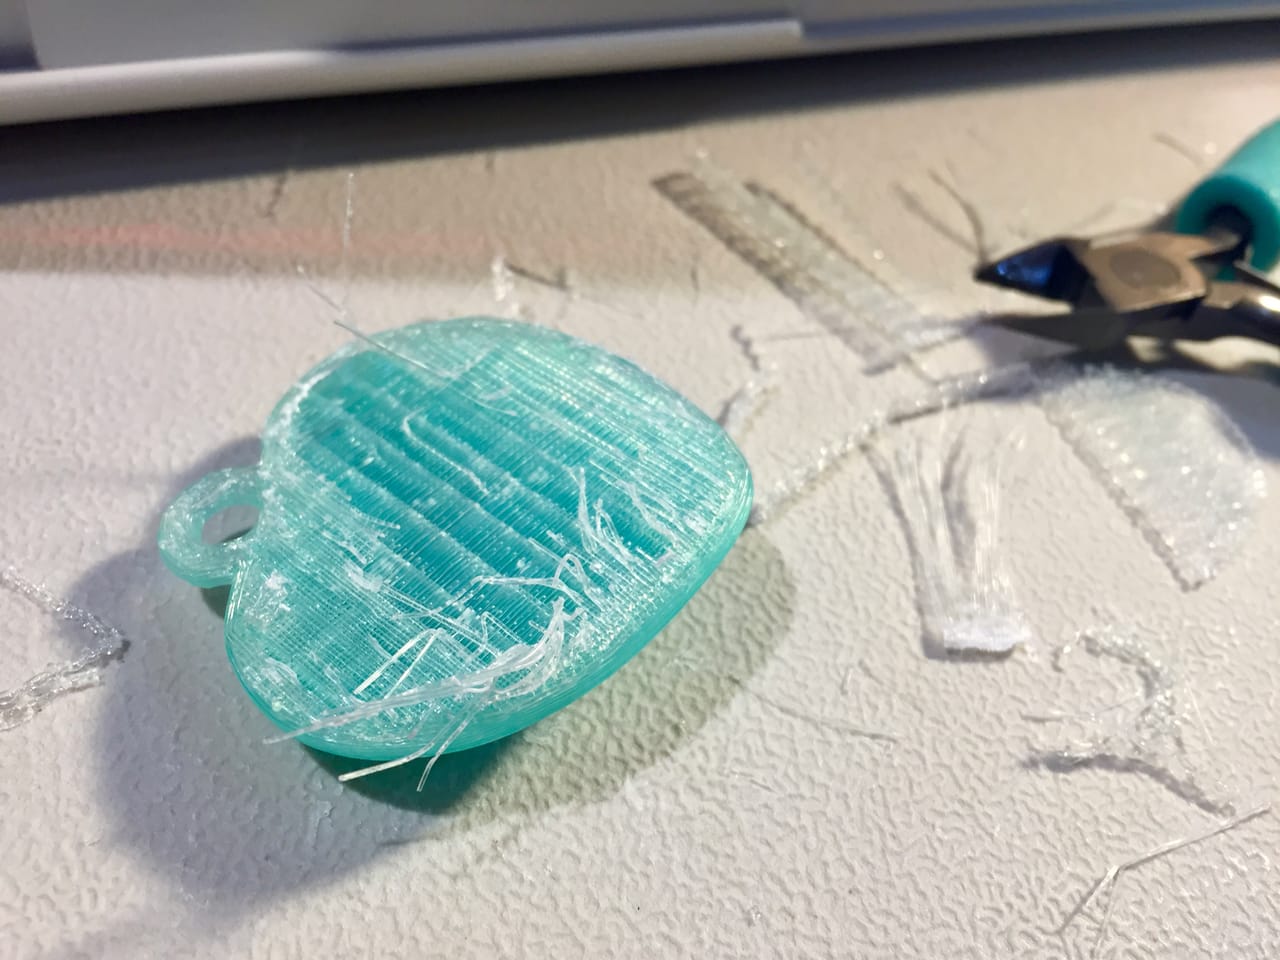  Removing hard-to-peel raft bits from a 3D print on the da Vinci Jr. 2.0 Mix 